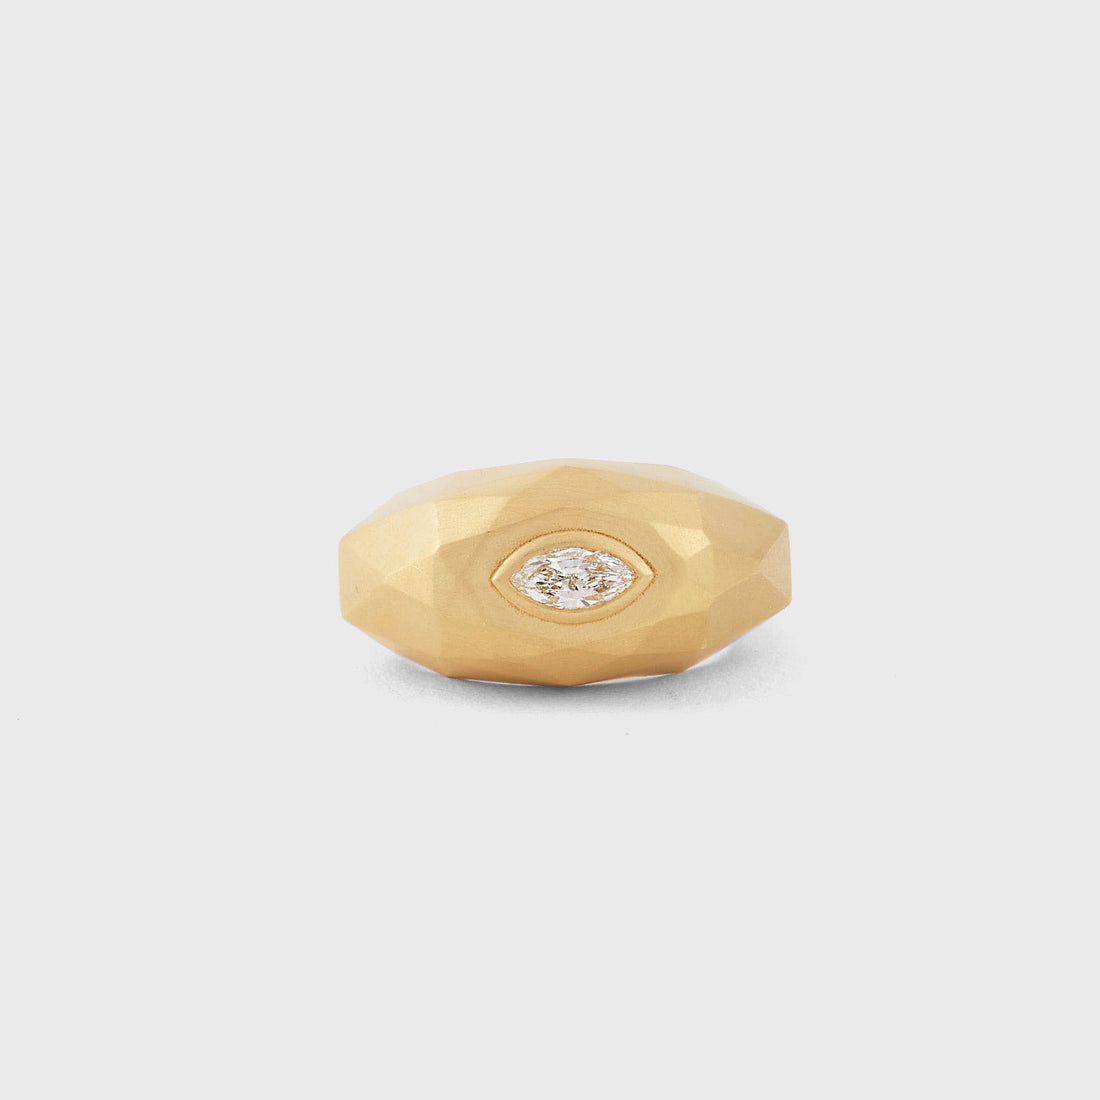 Dome shaped faceted ring